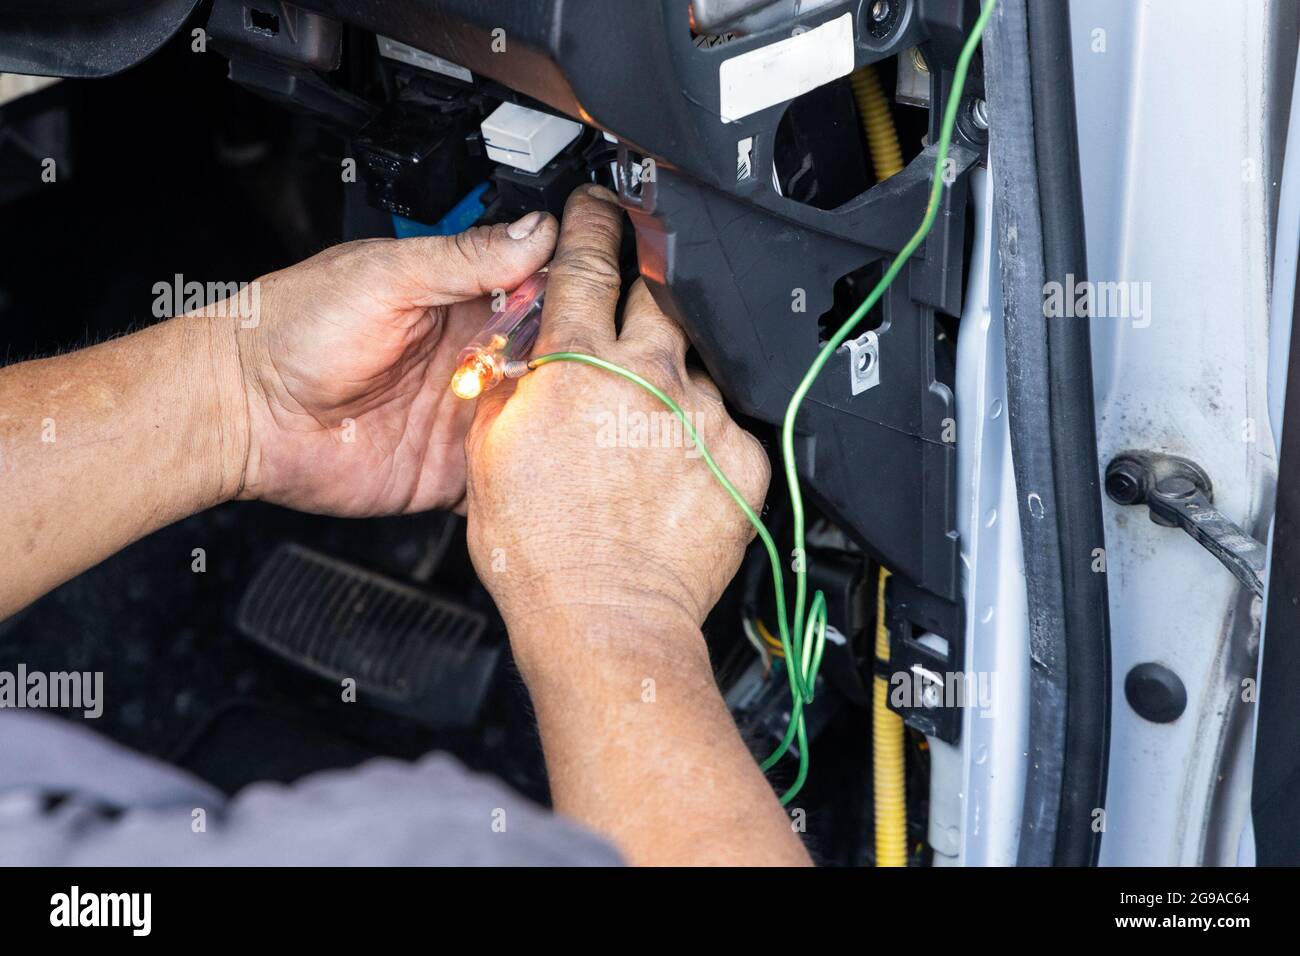 Auto technician diagnose car fixing wiring problem with test pen Stock Photo